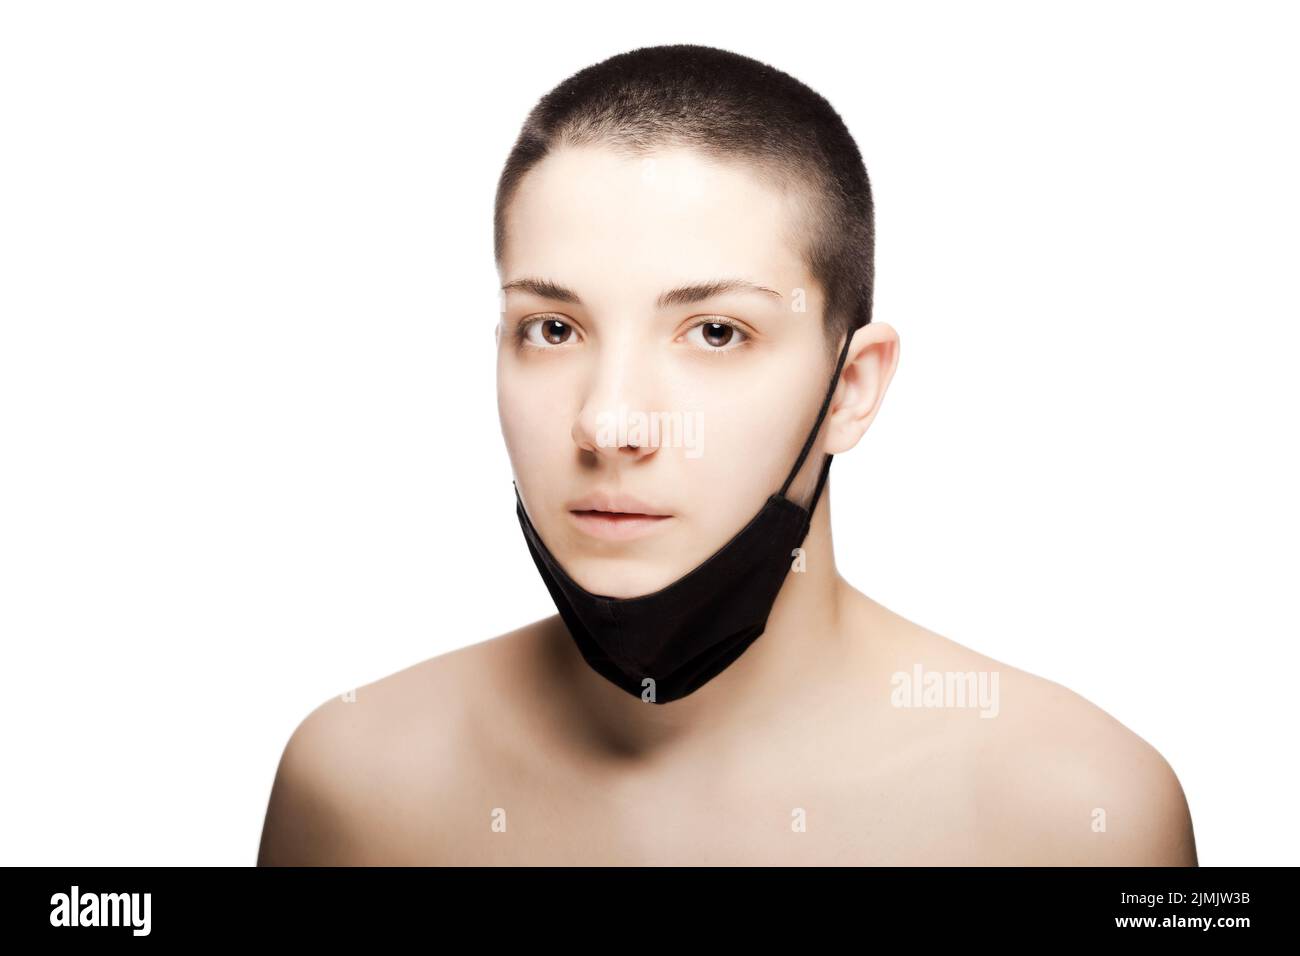 Cute girl with very short hair wearing black protective face mask under her chin. Studio portrait isolated on white background Stock Photo